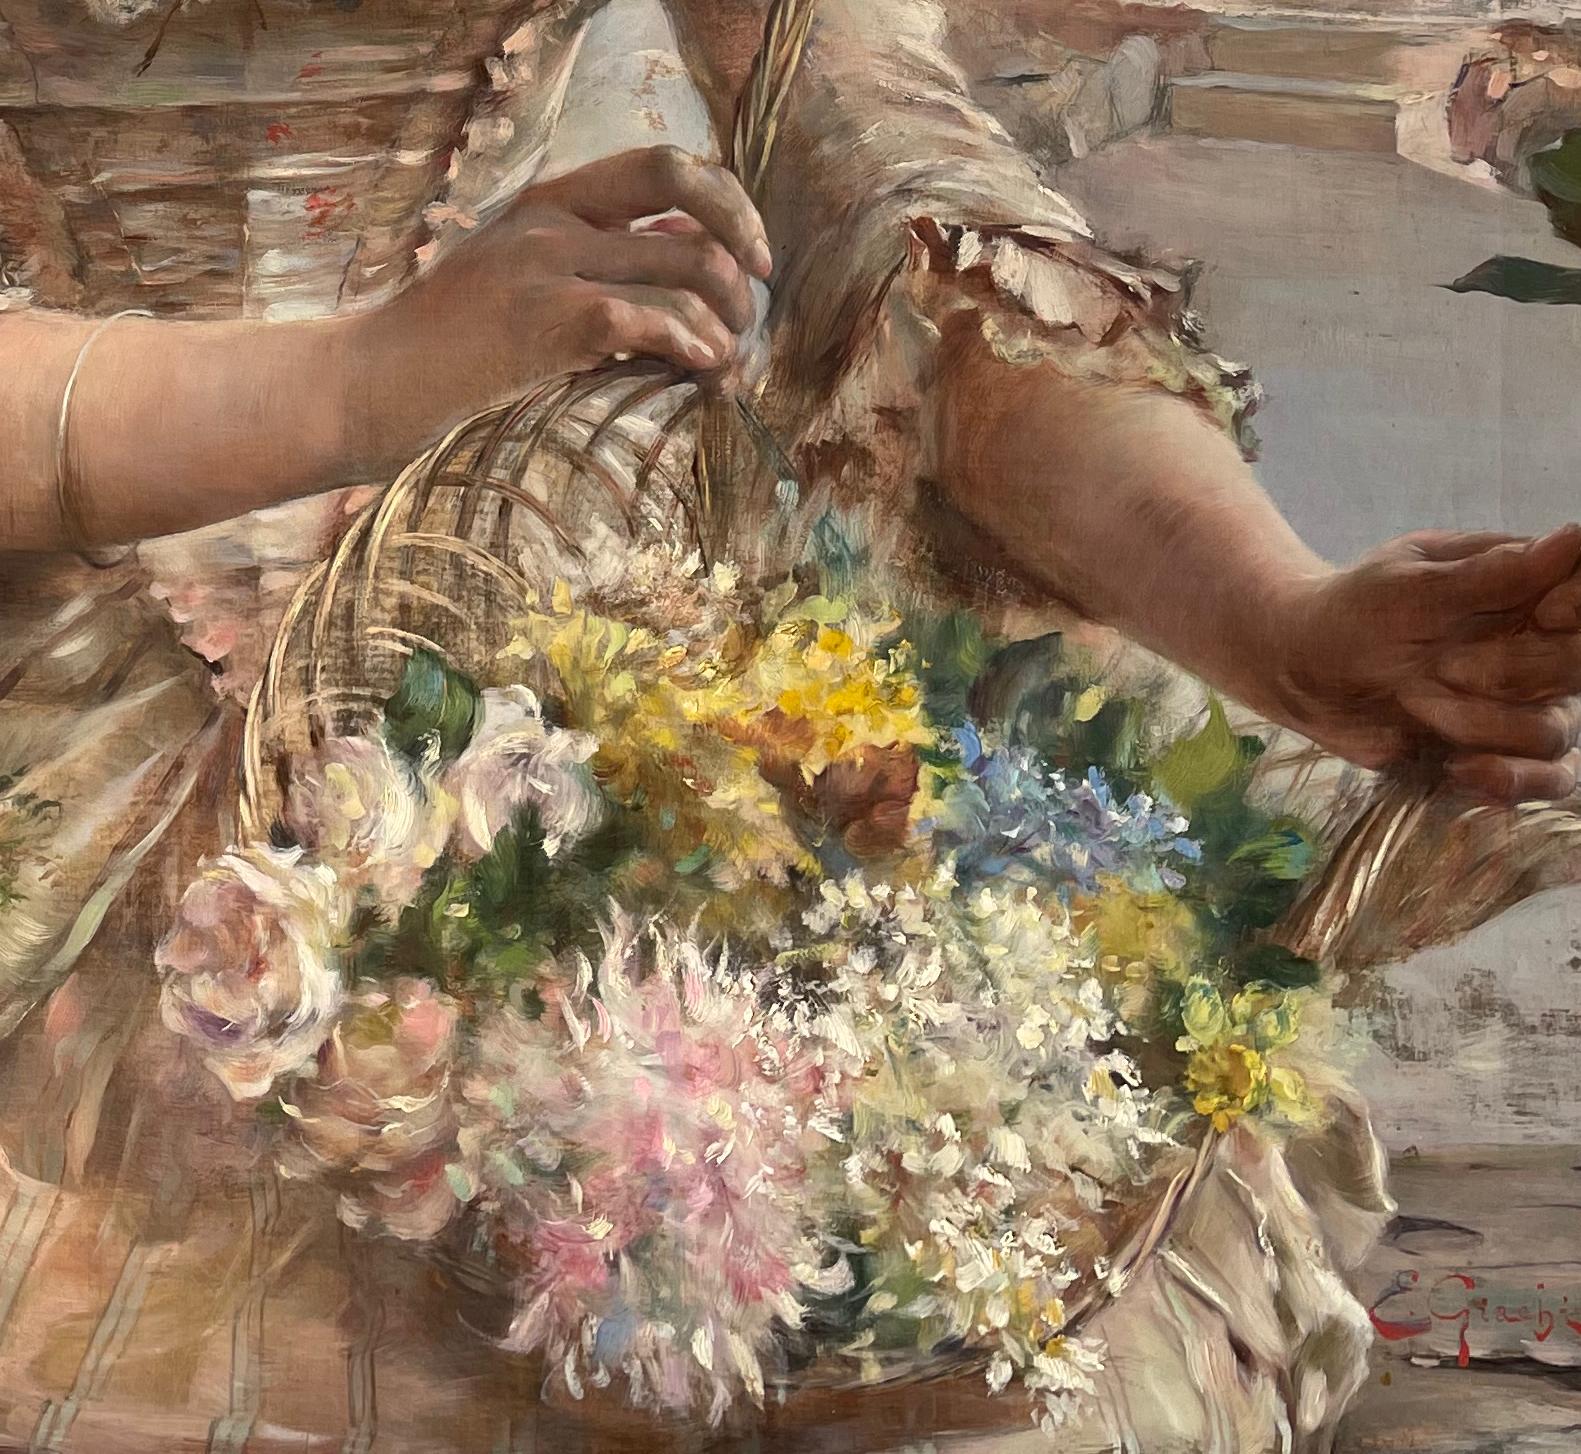 FLOWER GIRL by E. Giachi dress & flowers in Italian town landscape LARGE 19th c For Sale 2